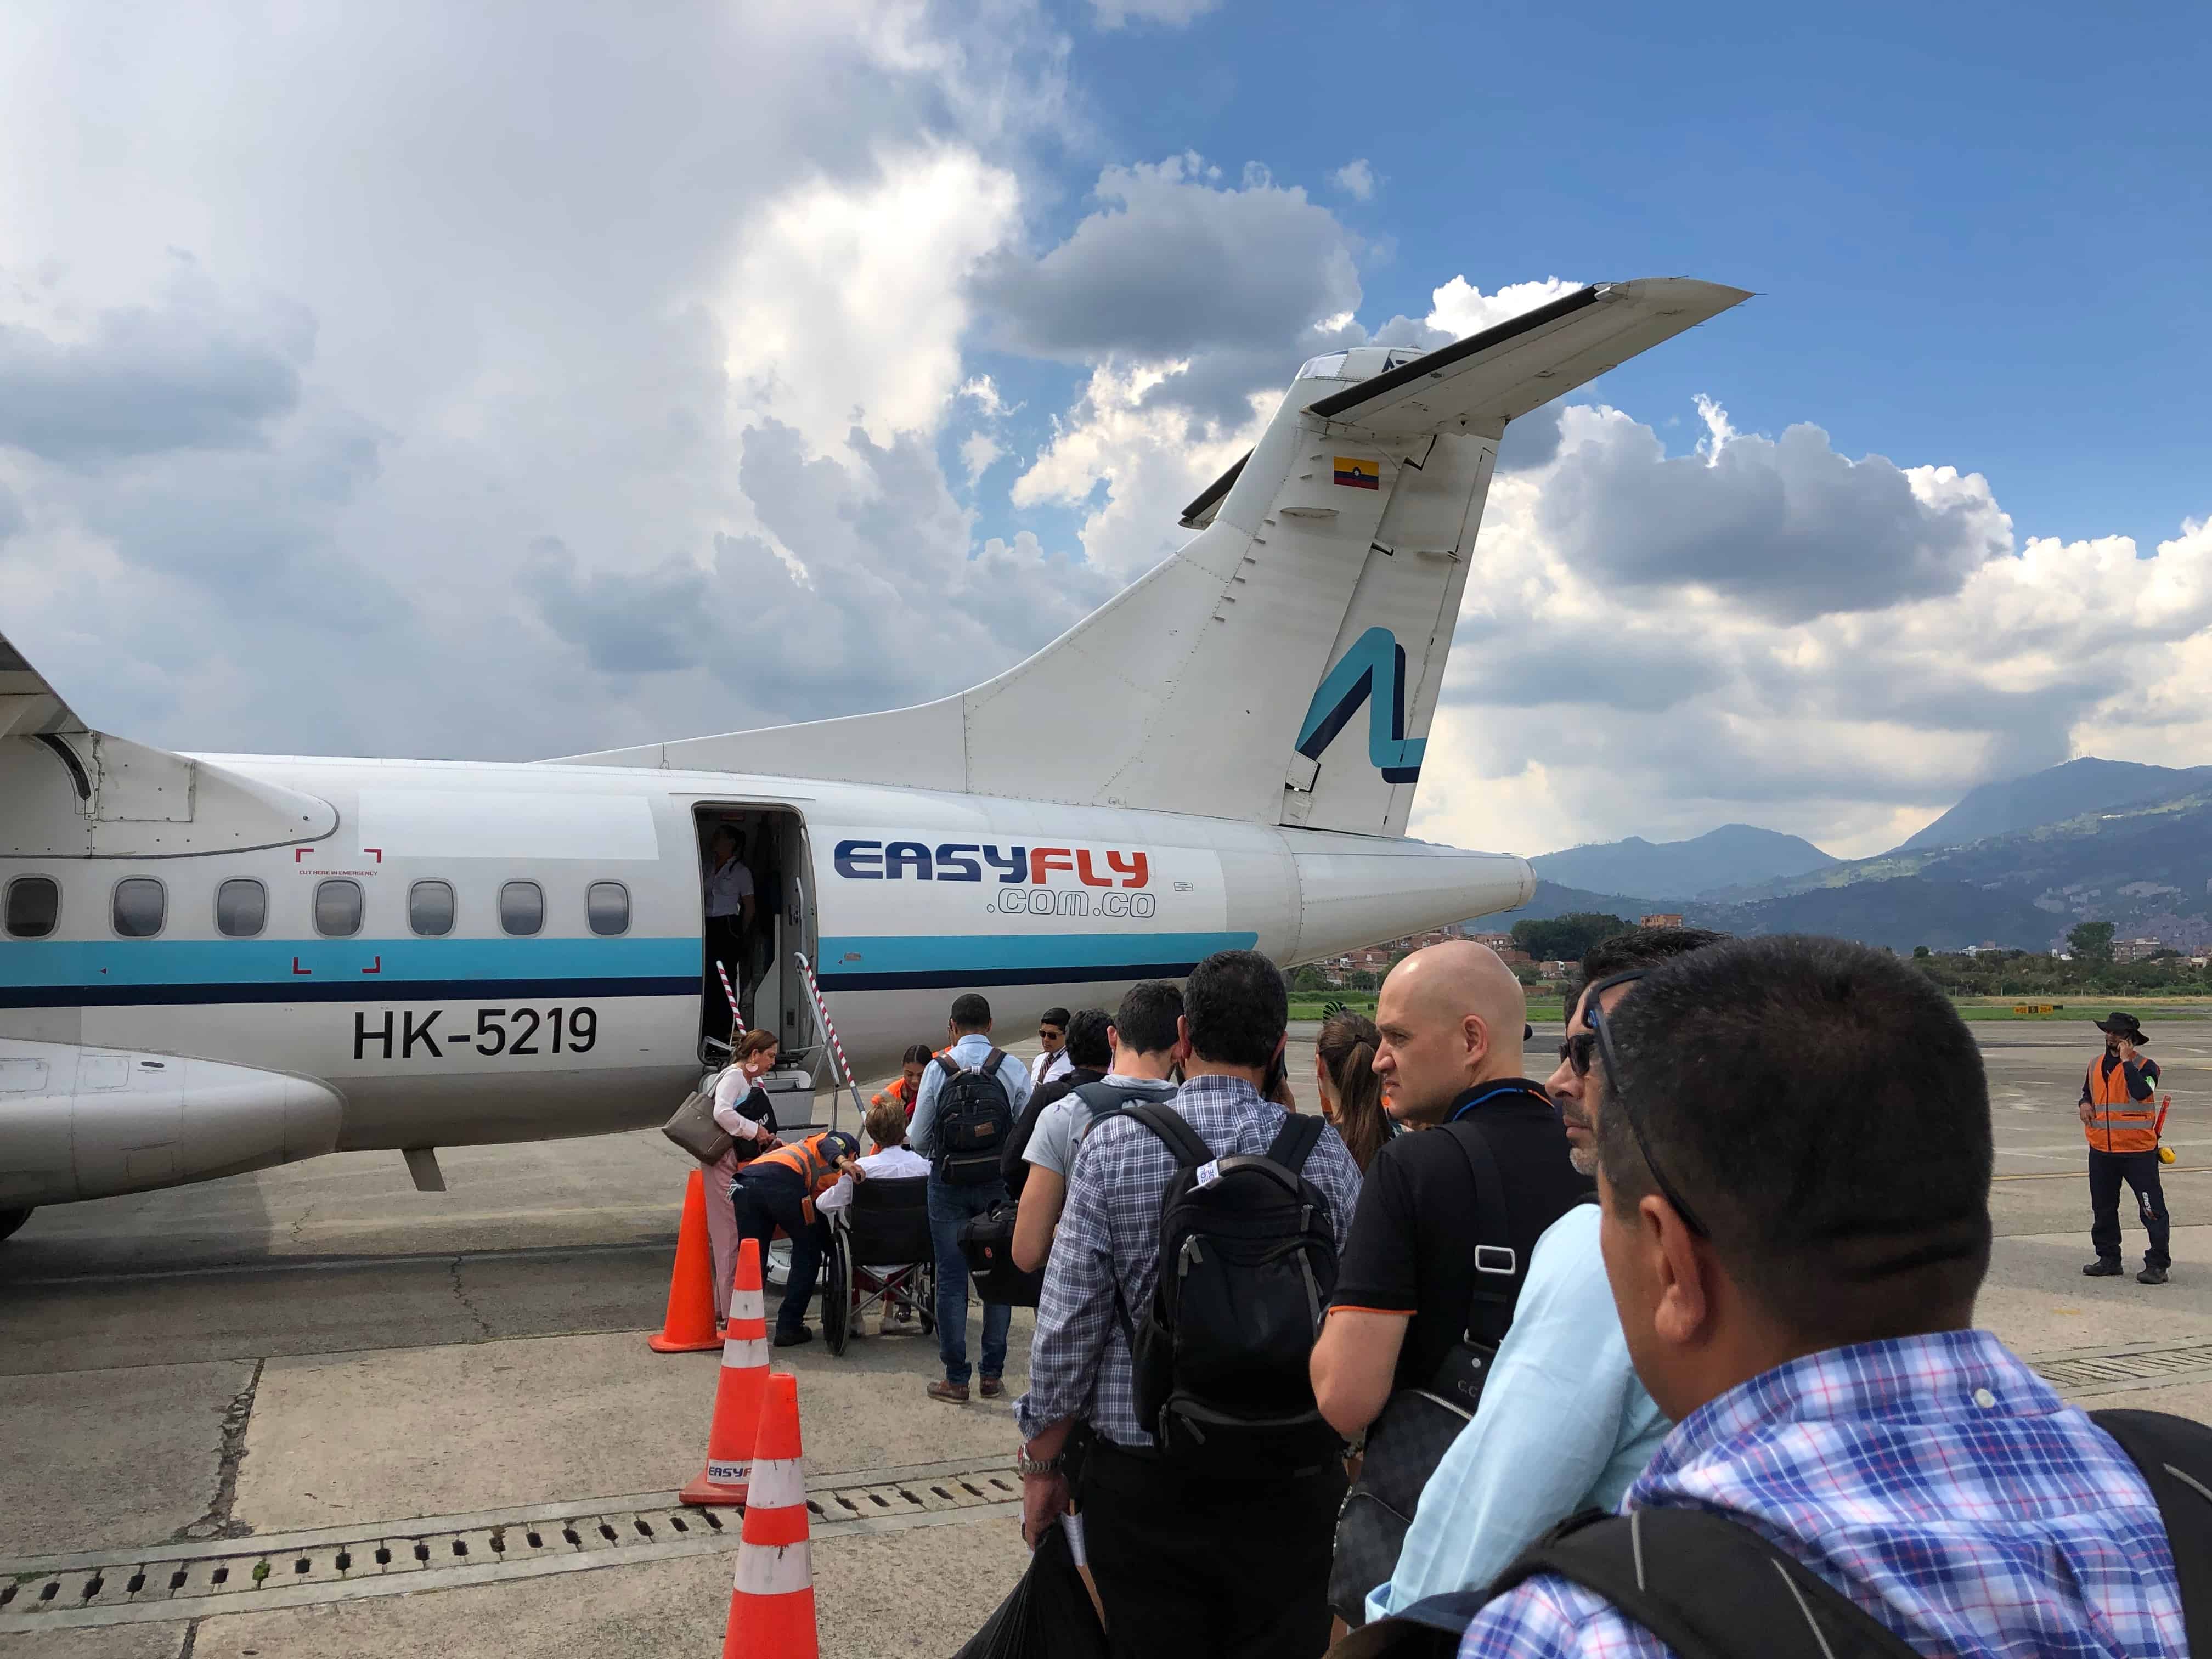 Boarding an EasyFly flight at Enrique Olaya Herrera Airport in Medellín, Antioquia, Colombia